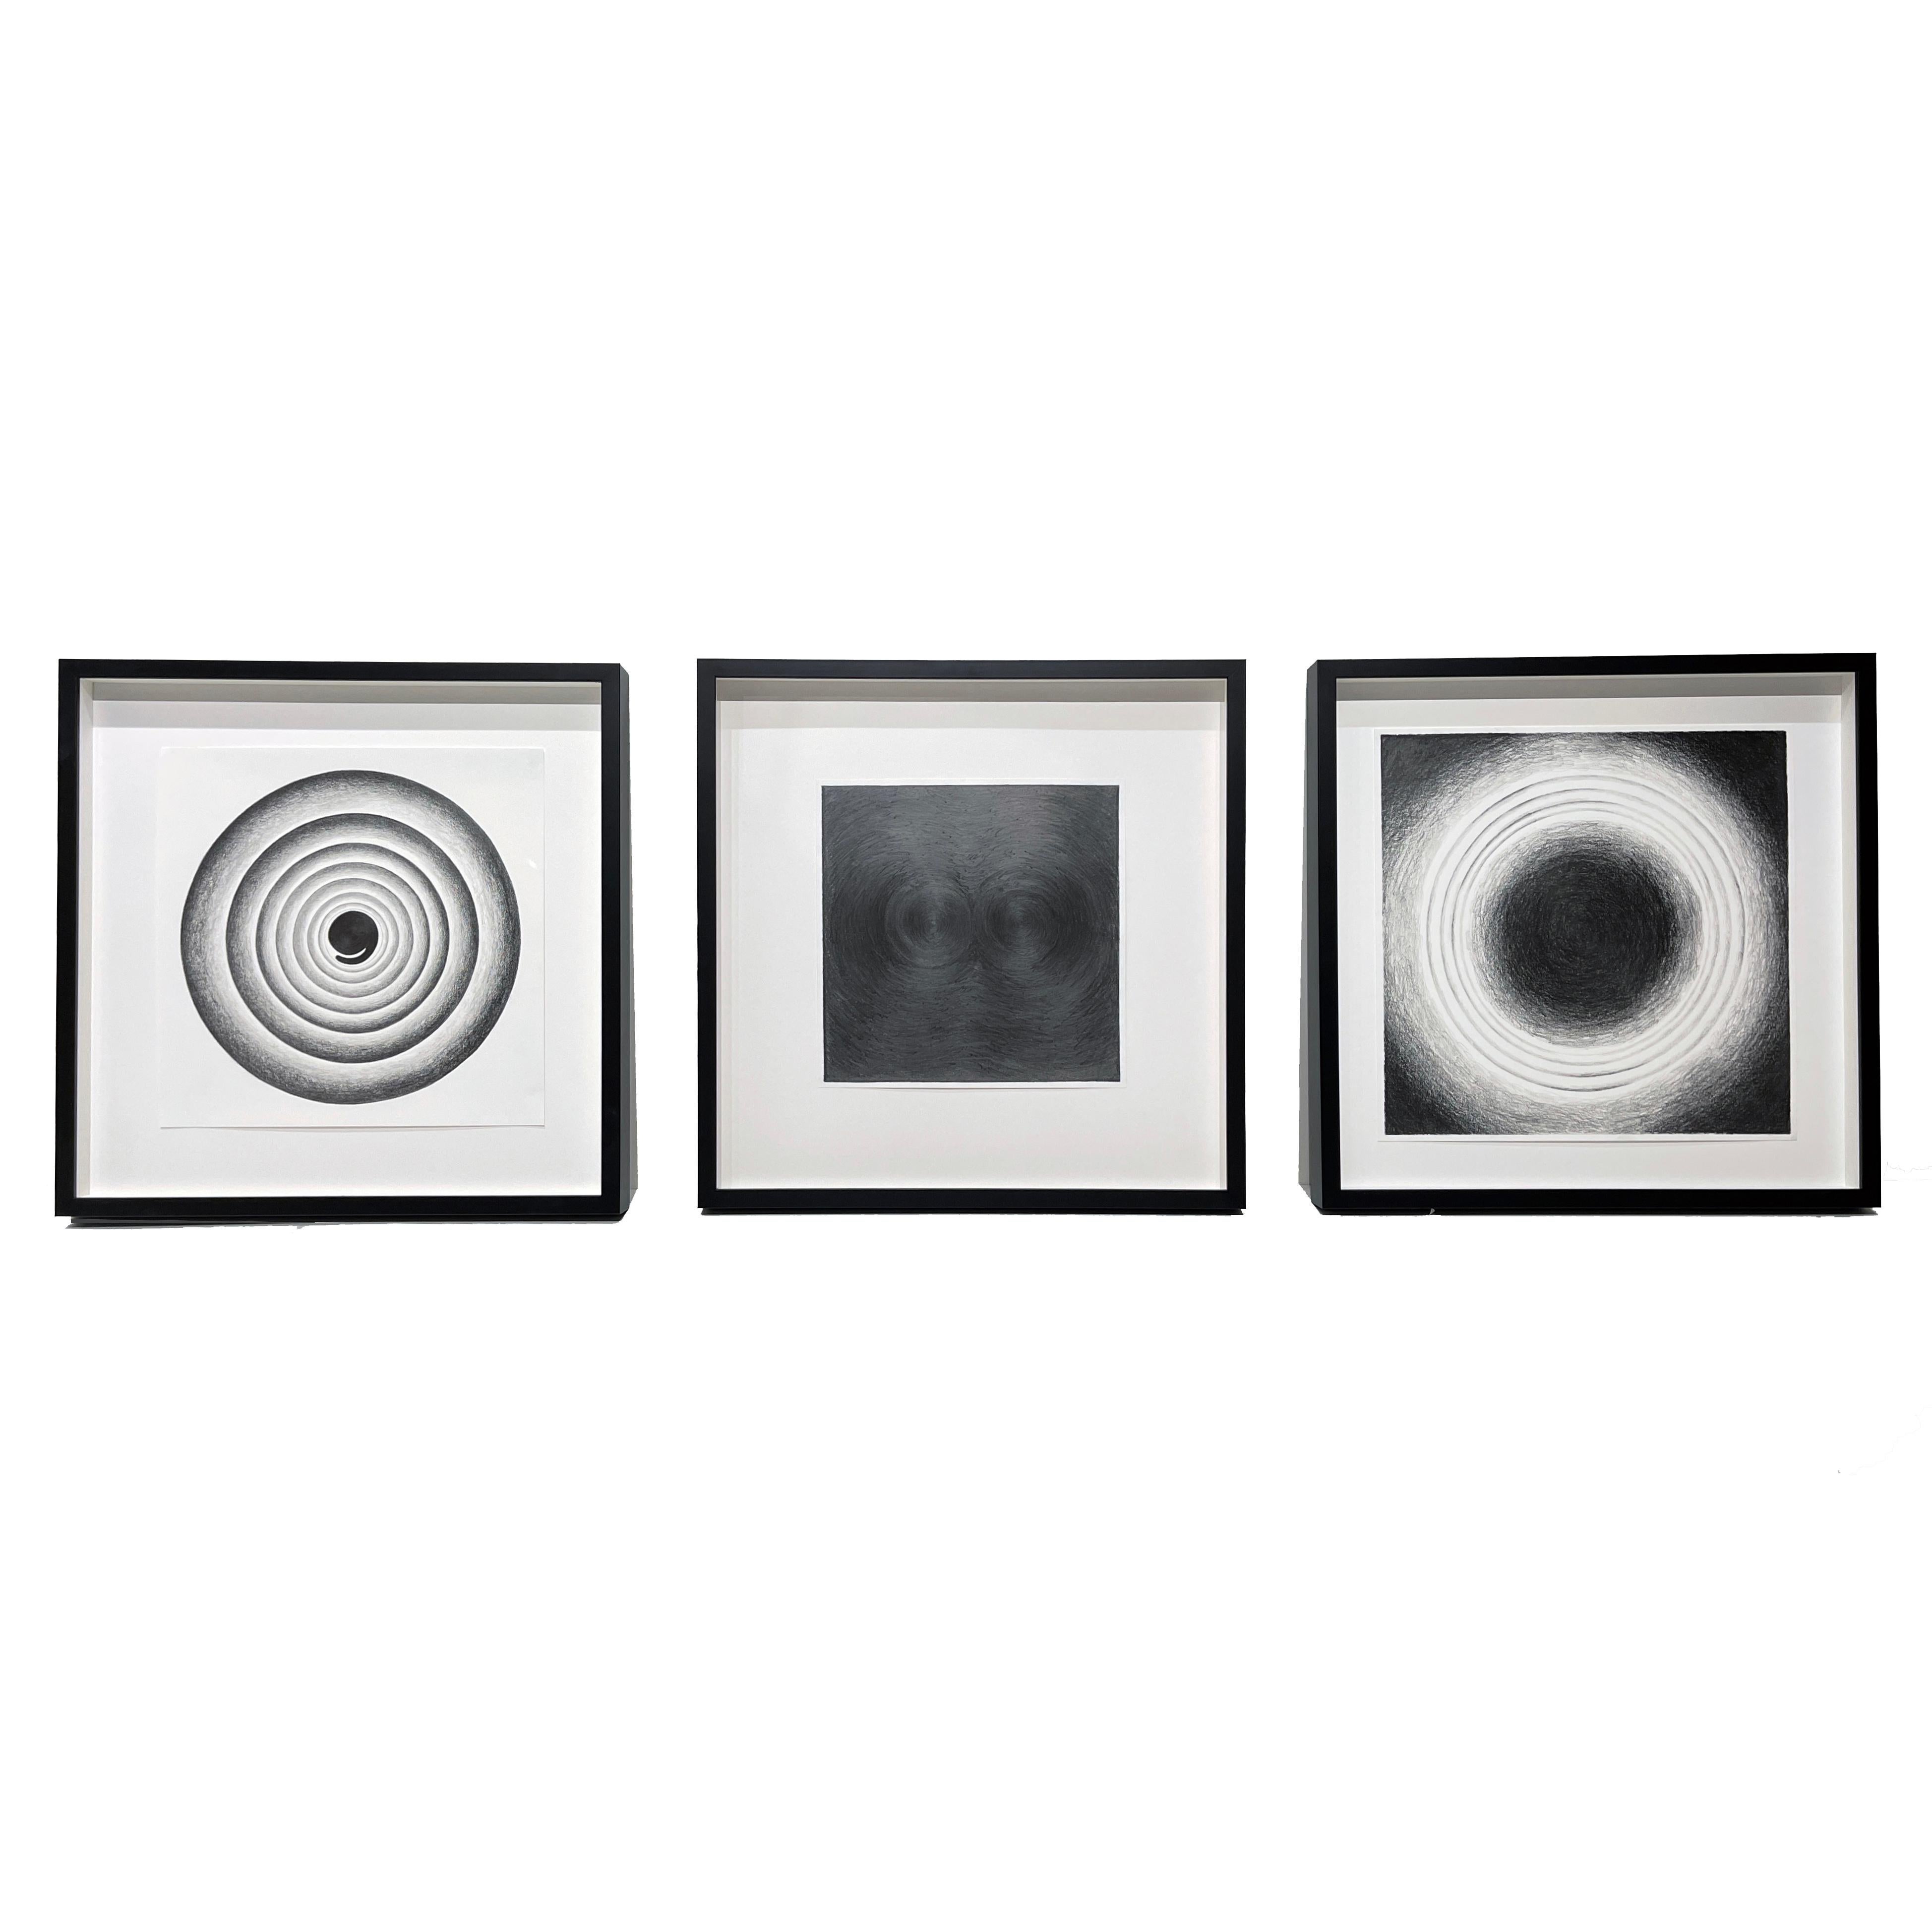 Joe Royer Abstract Drawing - Set of Three Geometric Circular Abstractions , Graphite on Paper, Framed